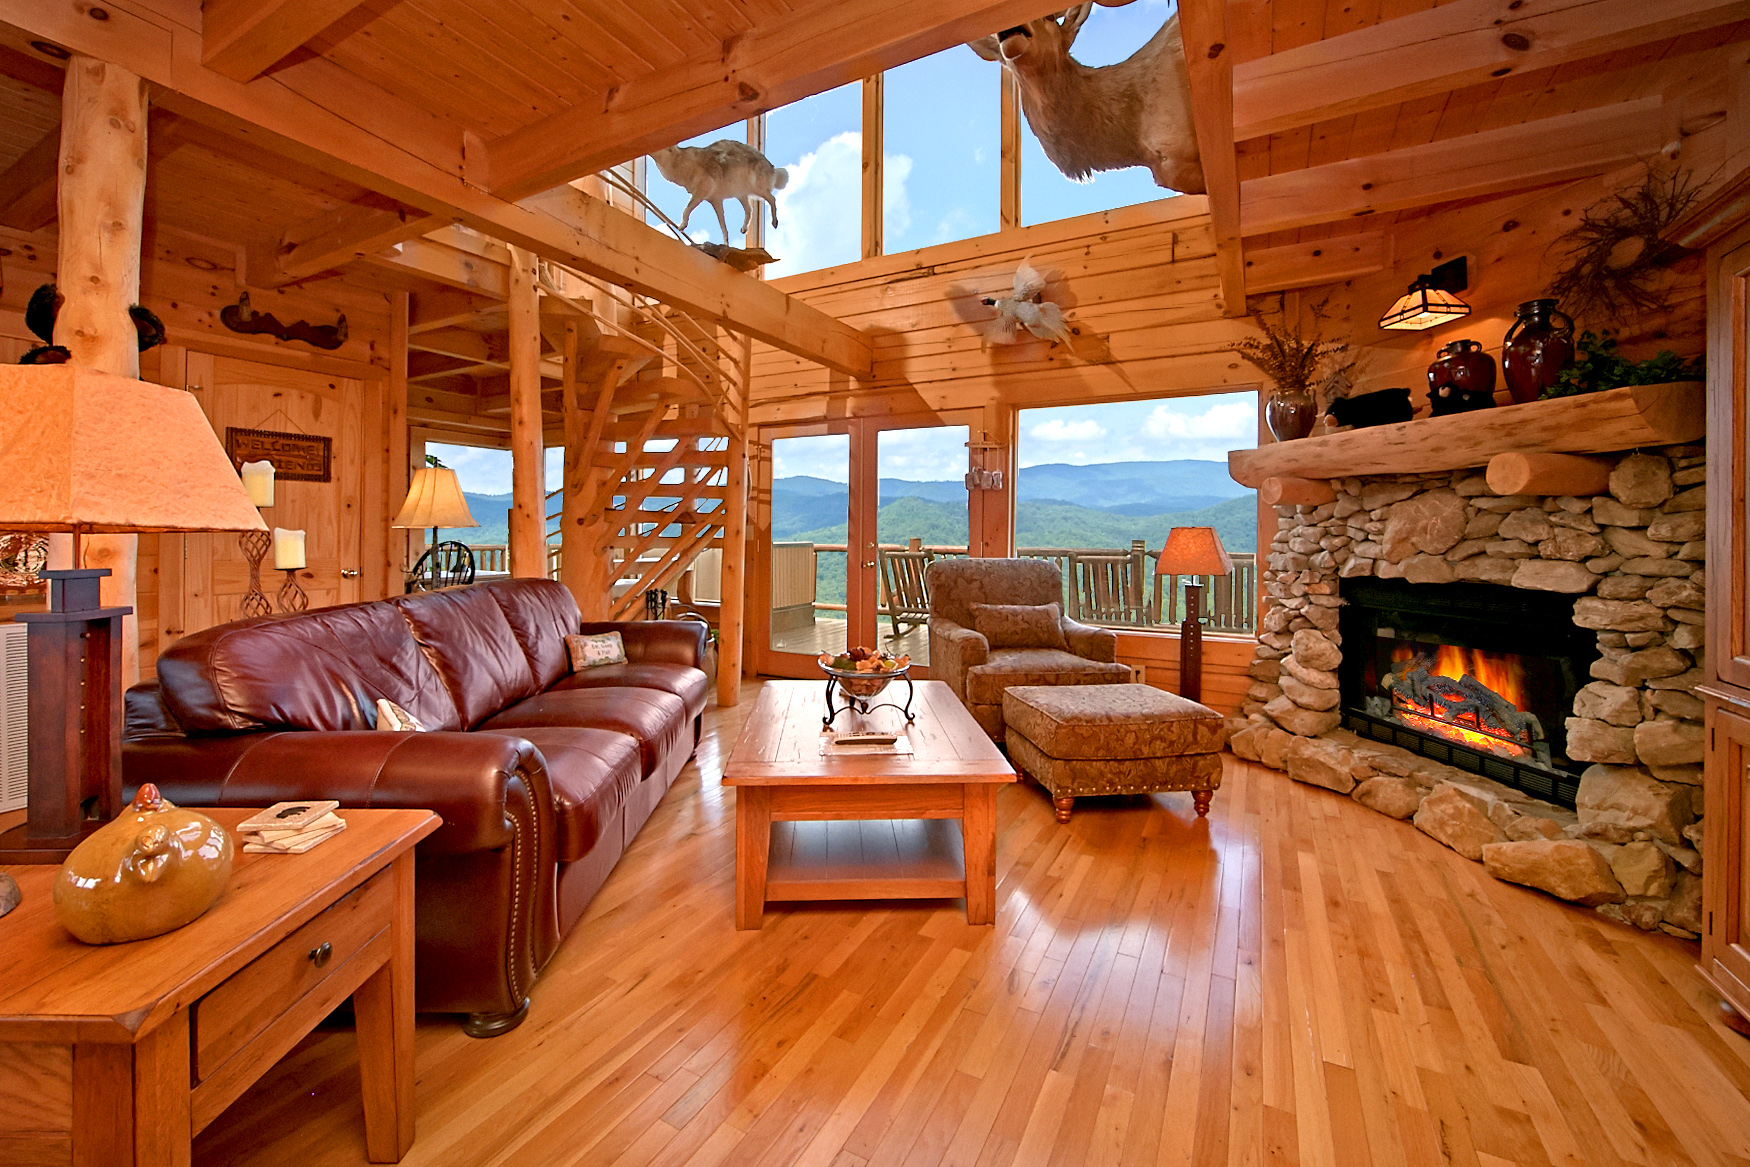 As the premier provider of Smoky Mountain cabins, American Mountain Rentals offers luxurious amenities with stunning views.